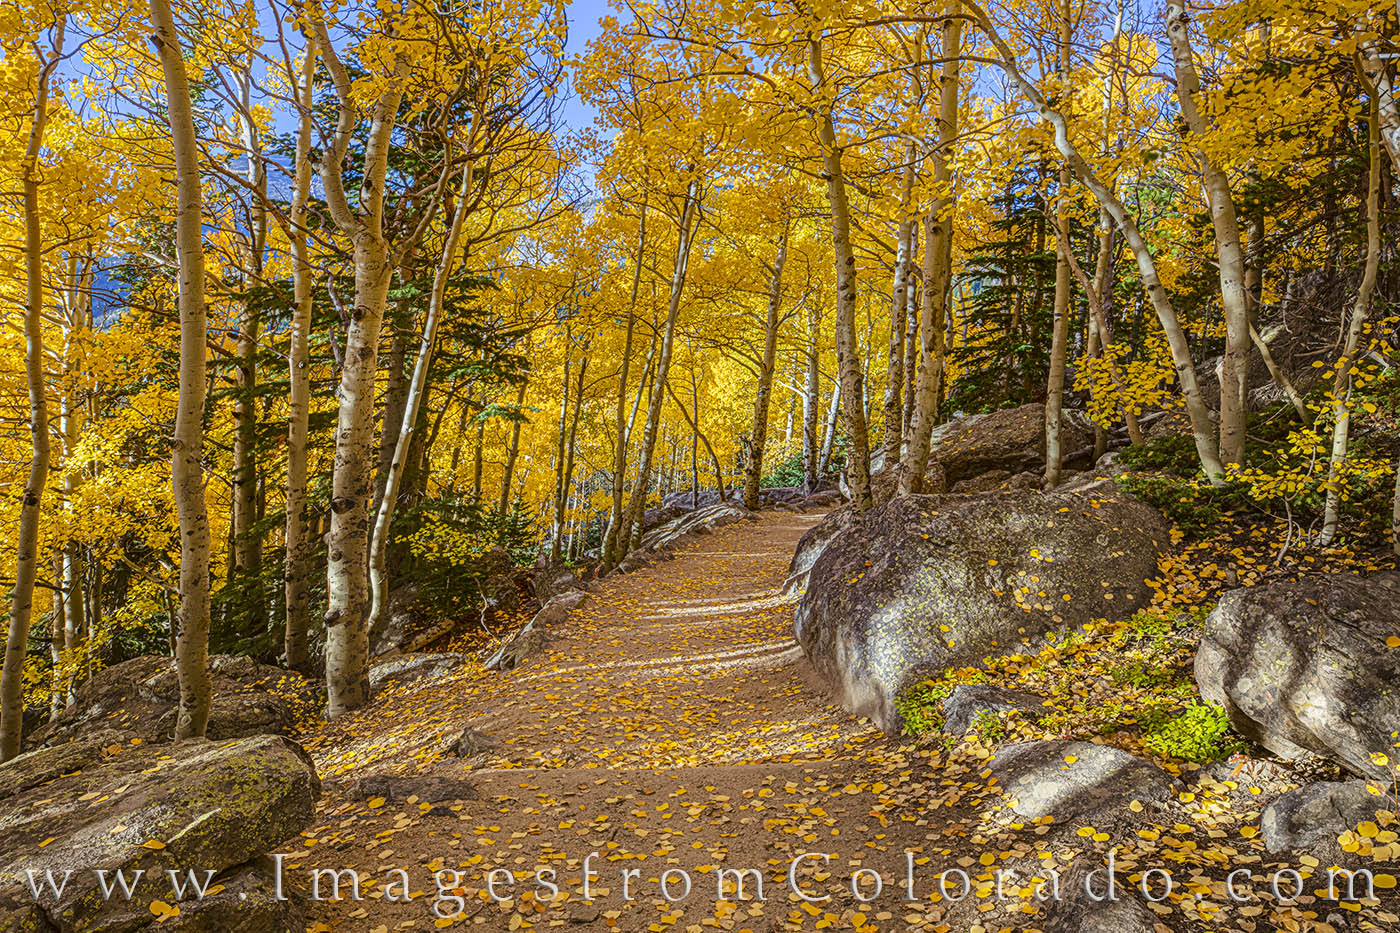 One of my favorite paths for fall colors in Rocky Mountain National Park - a well-worn trail near Bear Lake - offers beautiful...